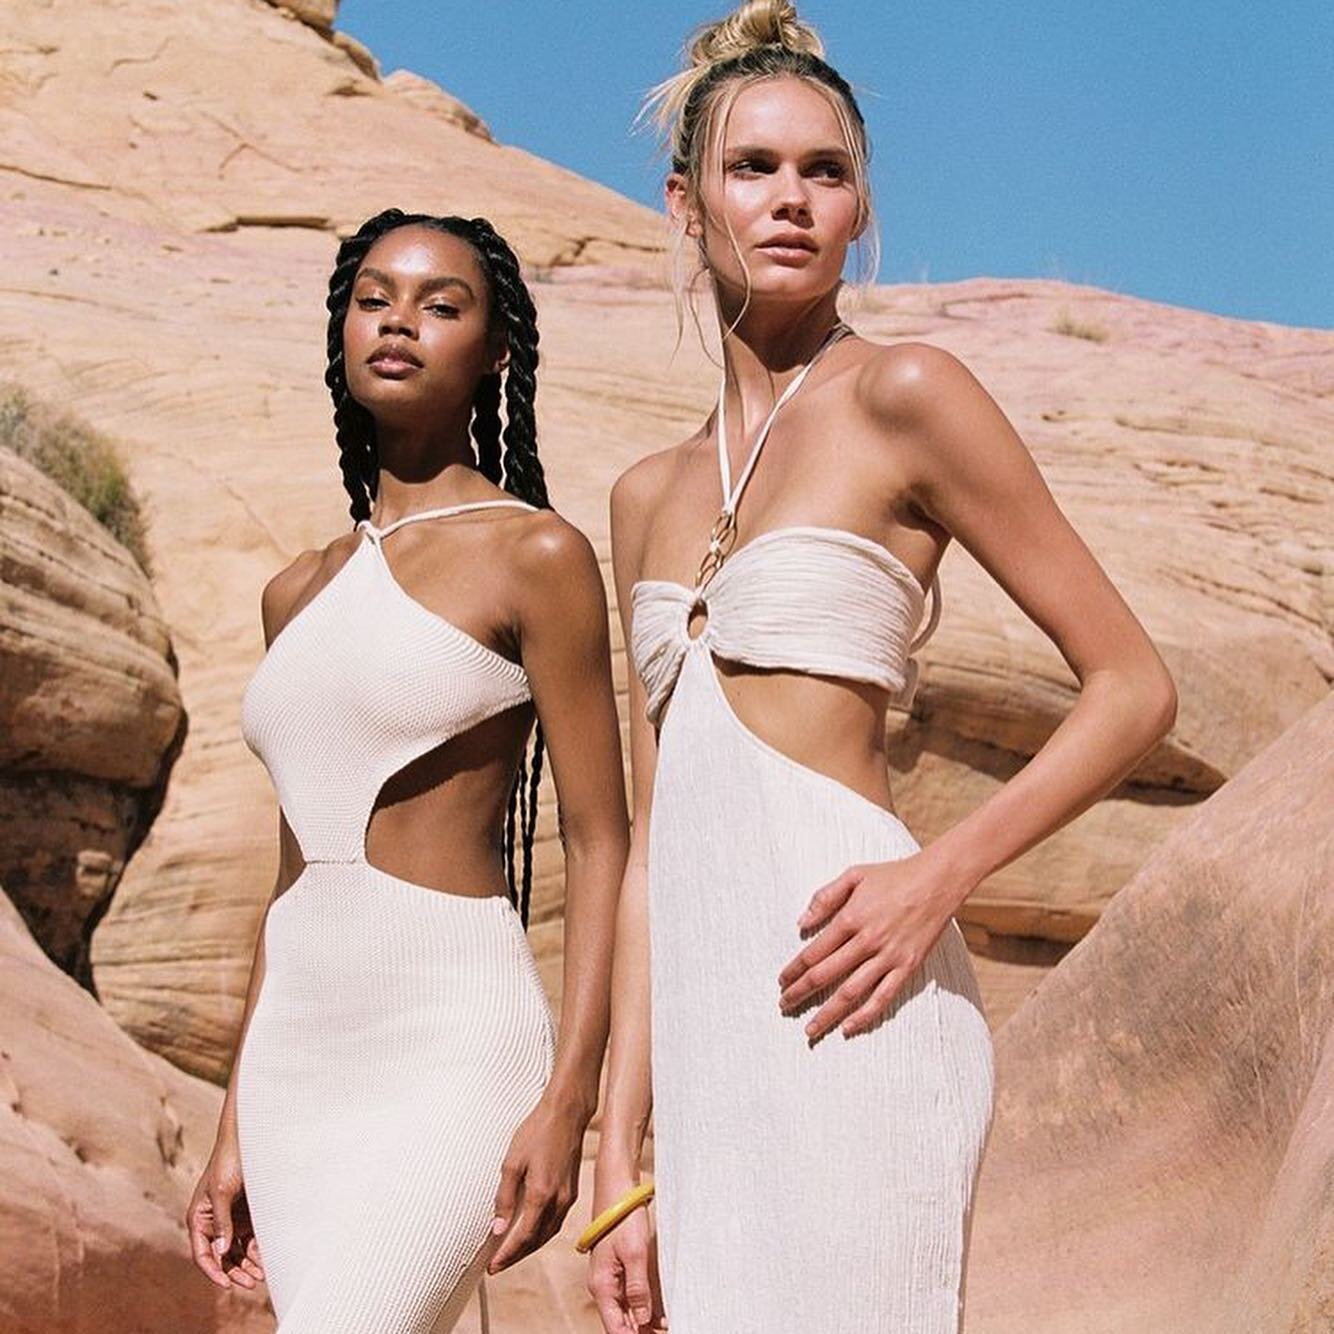 A warm welcome to our newest RTW brand @savannahmorrowthelabel 🧡 We are over the moon to have this incredible brand be part of our family. We are currently showing their Resort 22 collection - contact us for appointments.